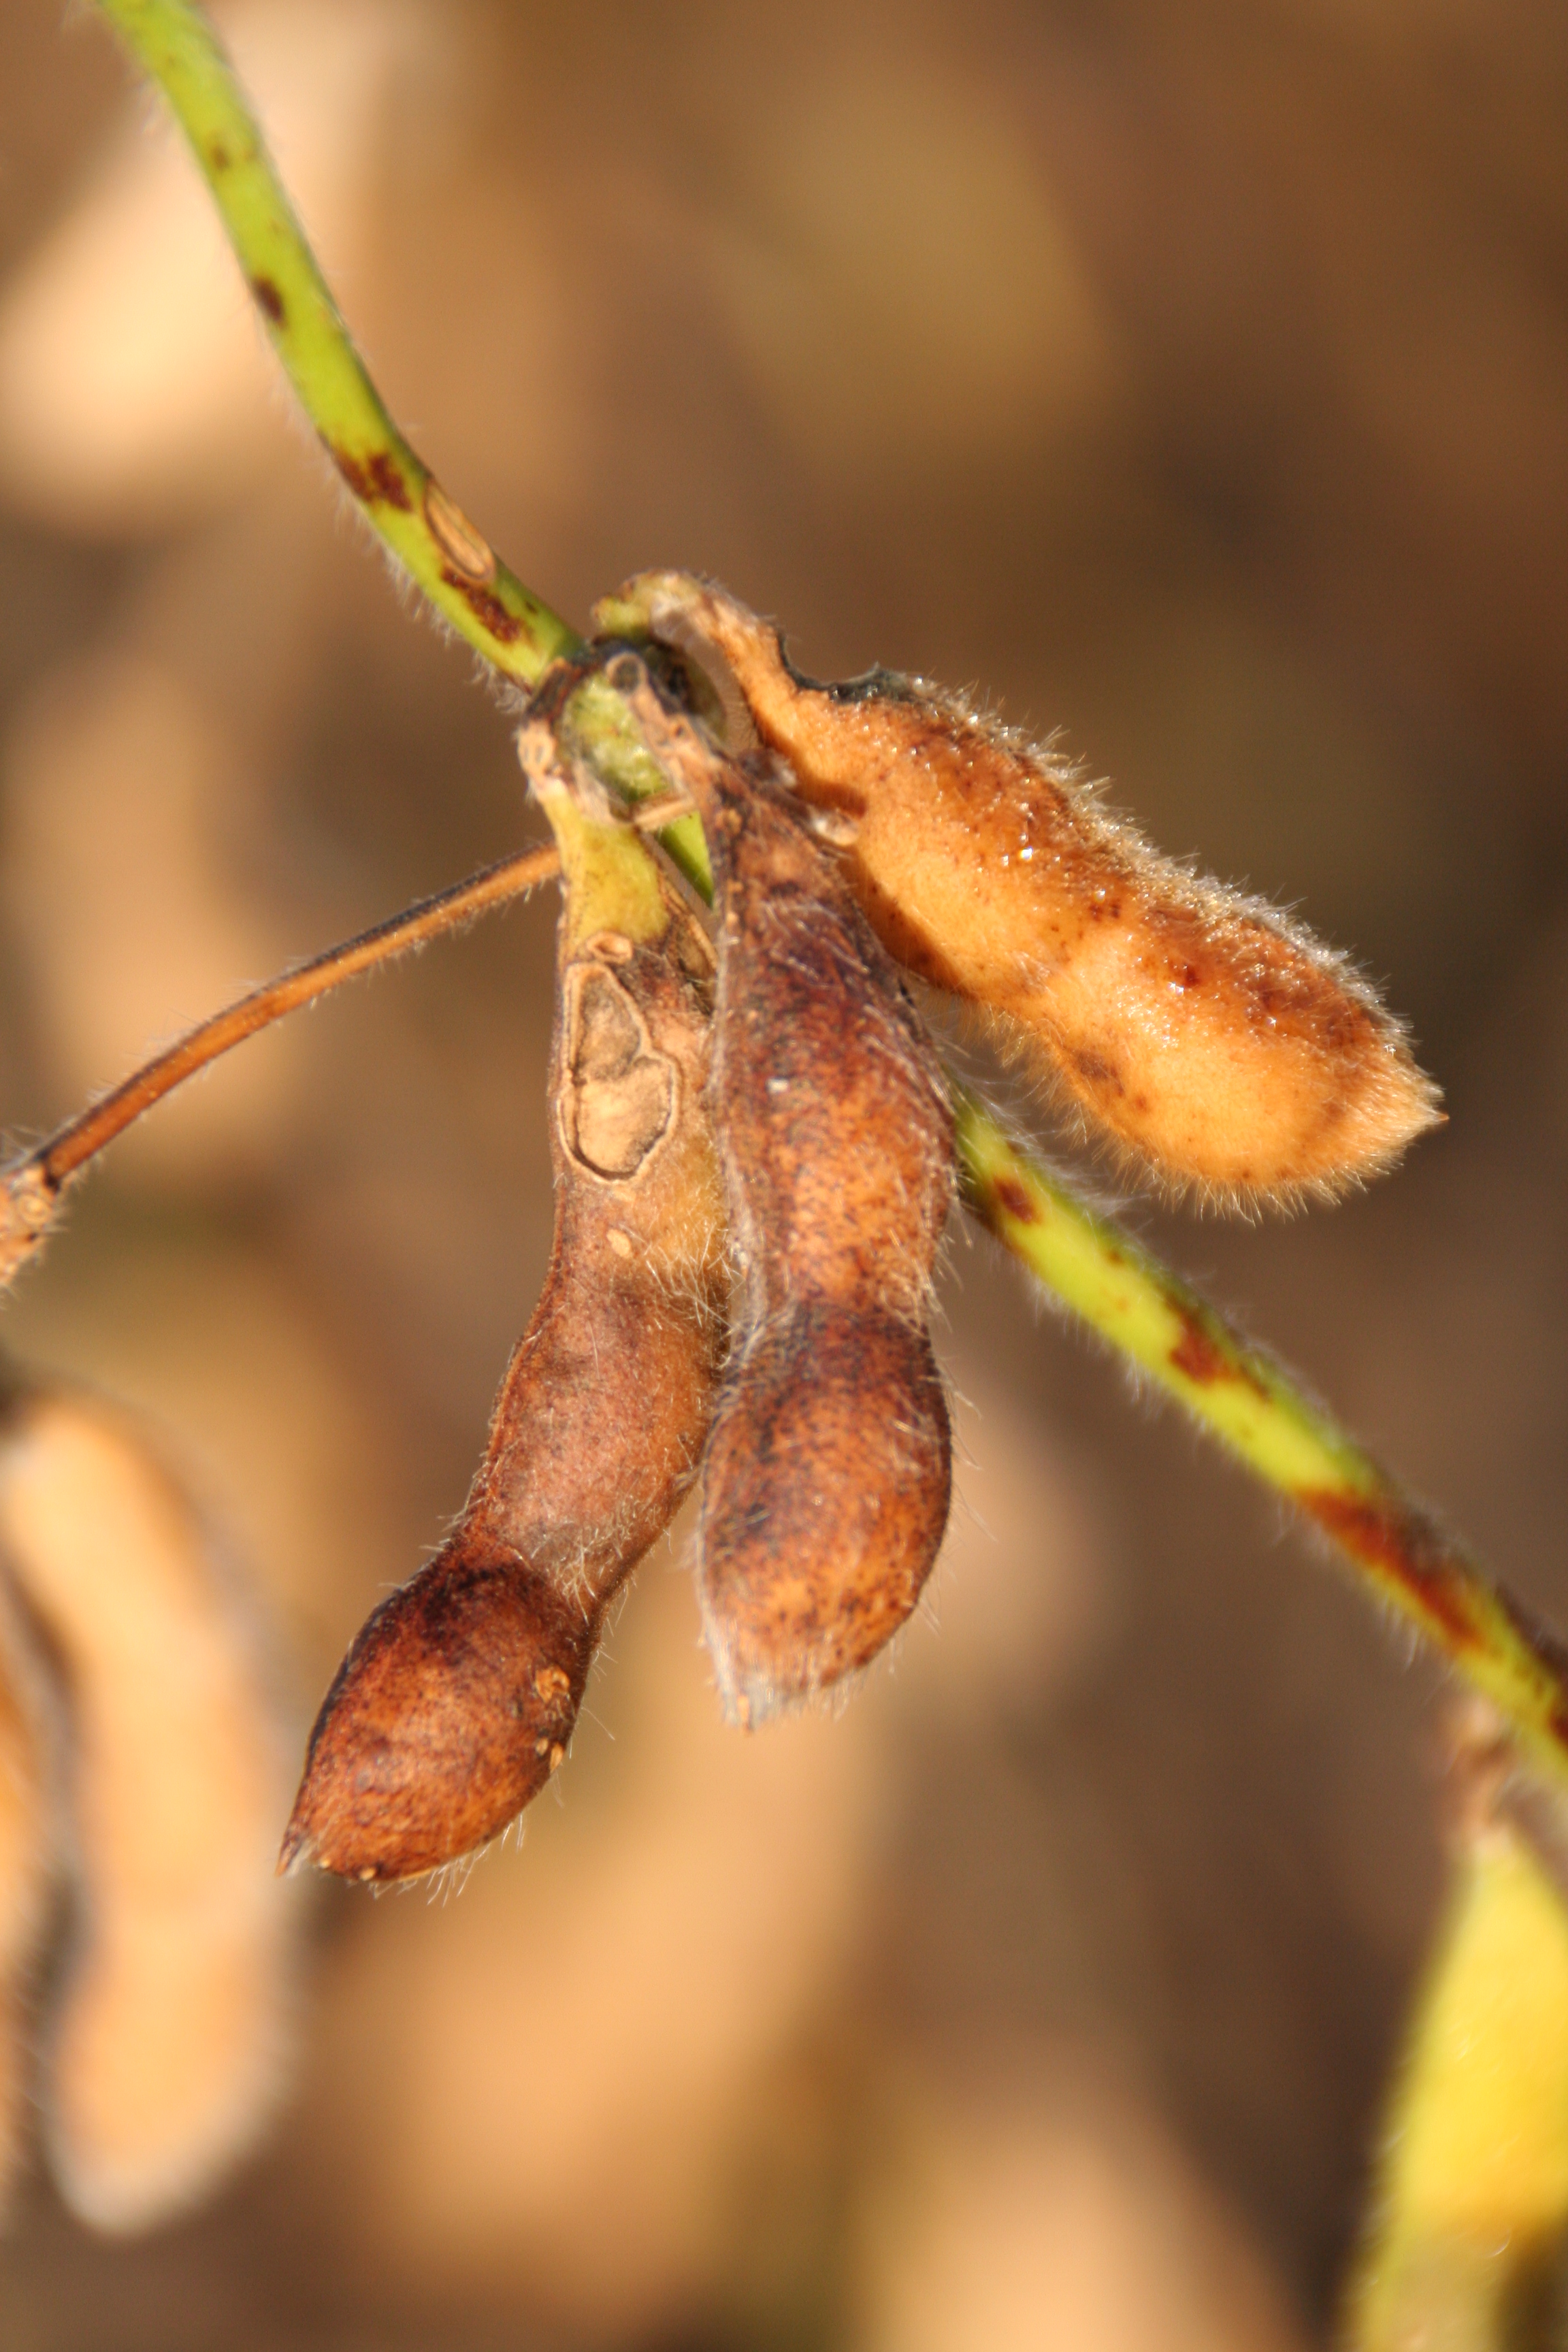 Symptoms of Phomopsis seed decay on soybean pods.